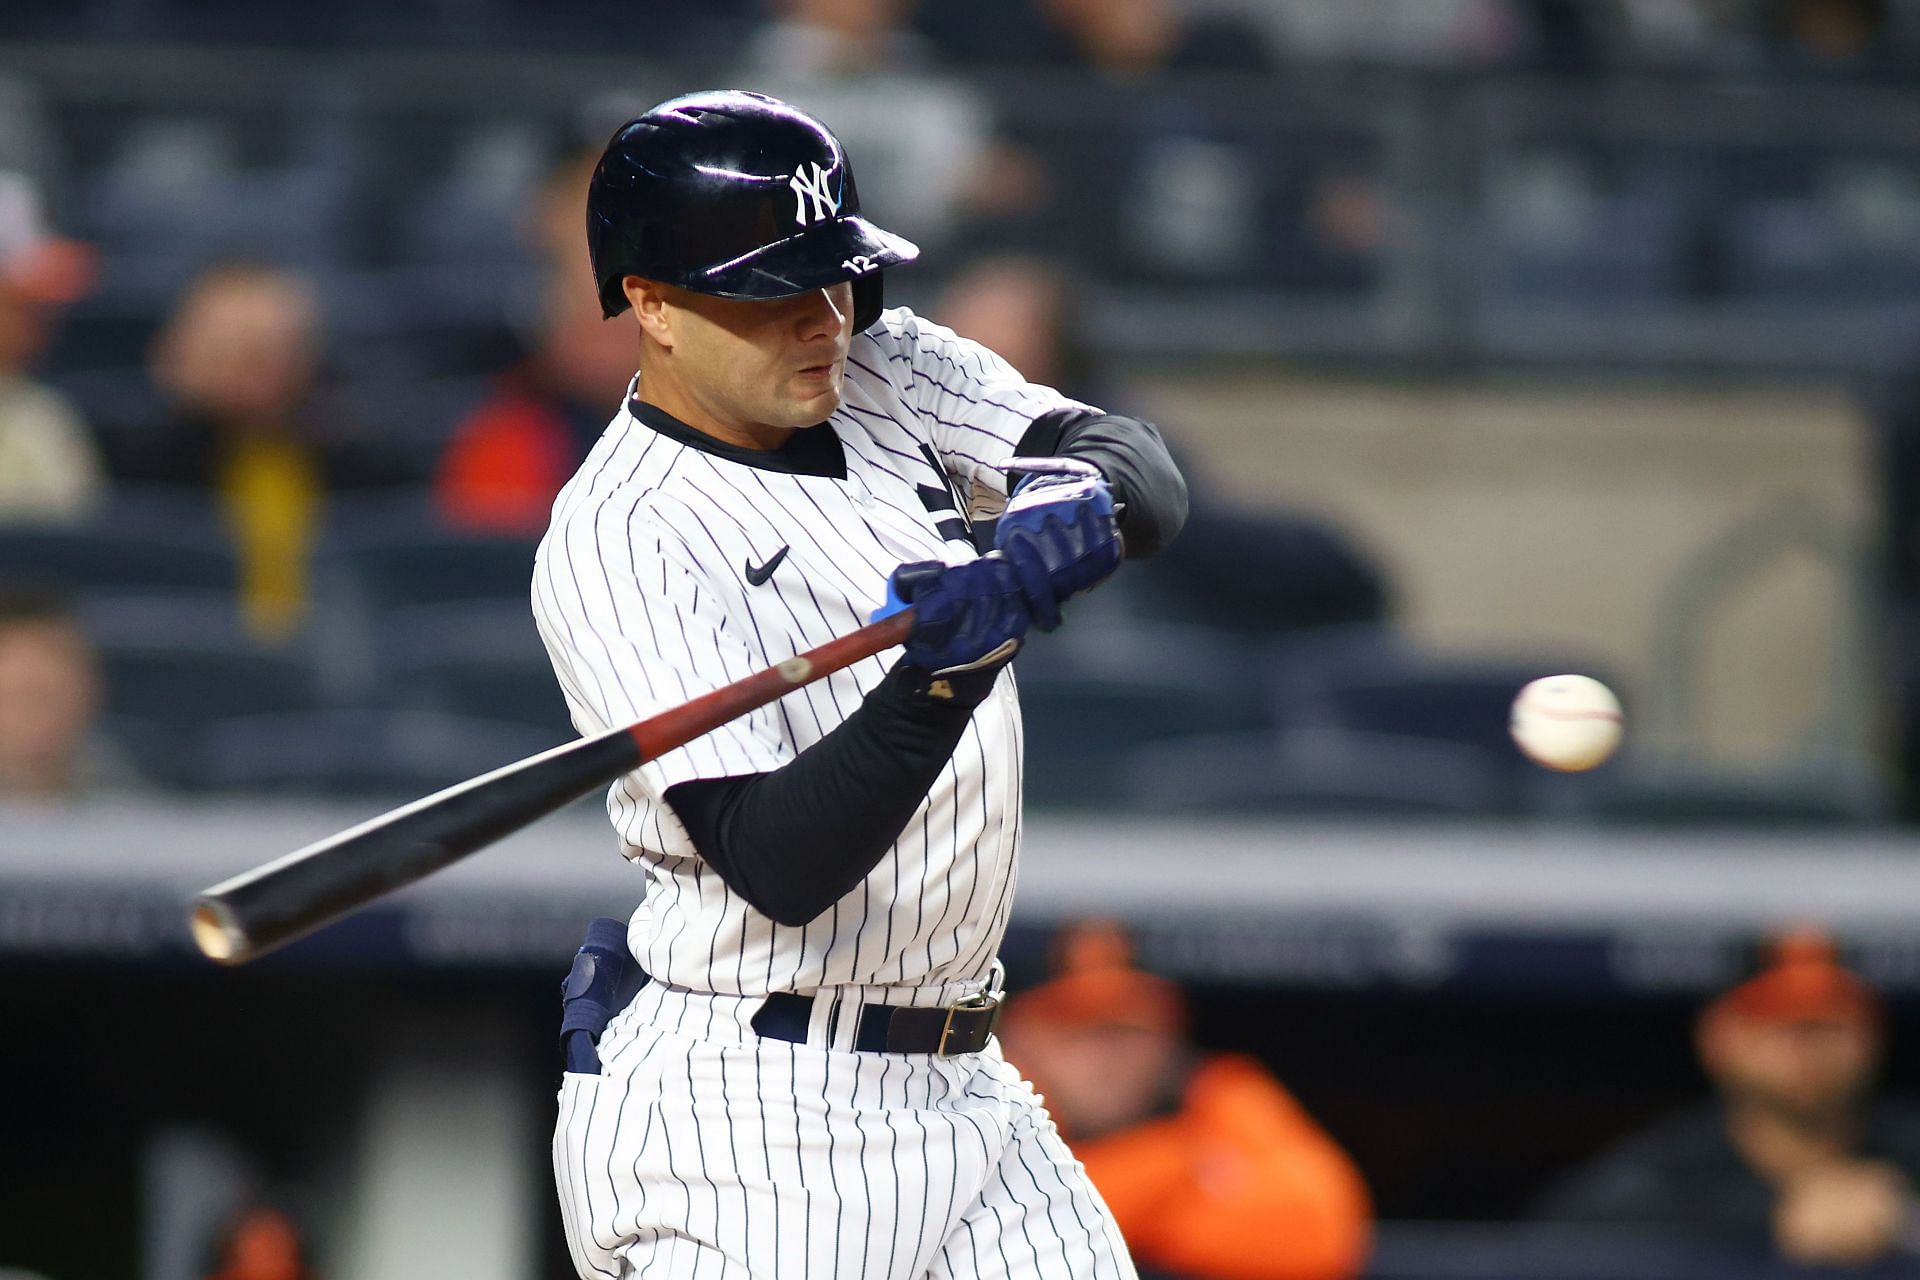 New York Yankees: Ranking the best player at each position so far